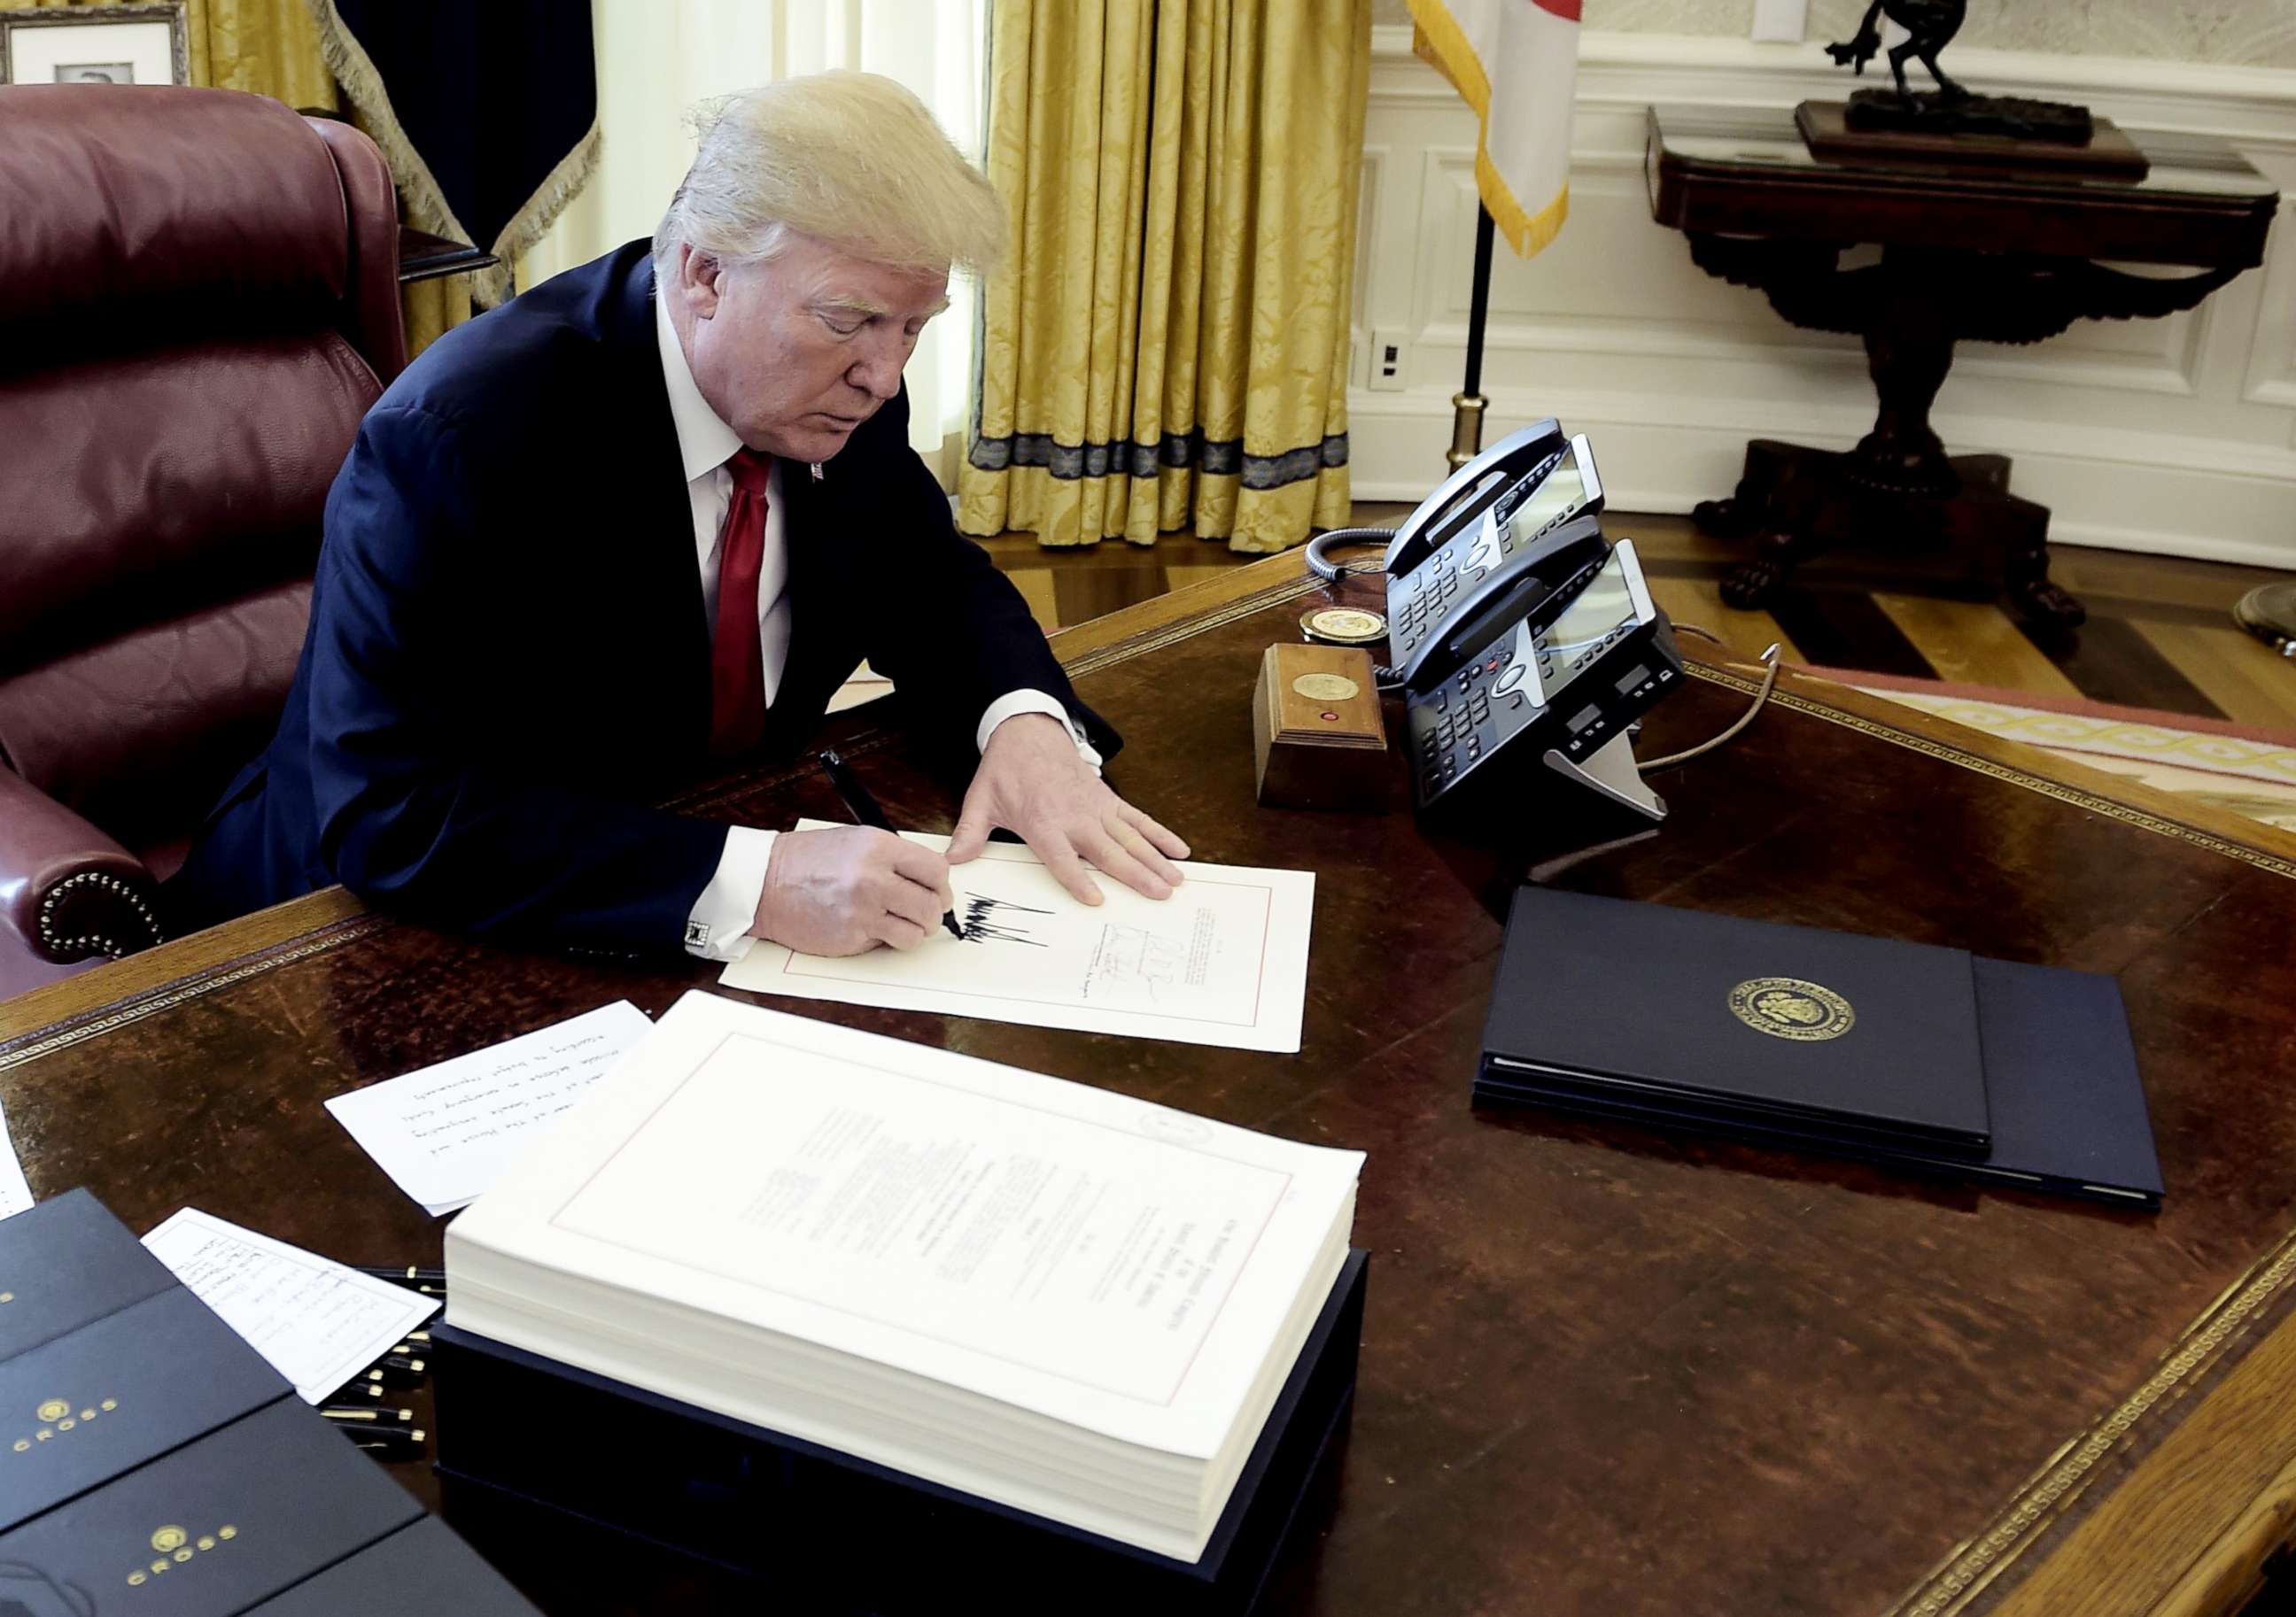 PHOTO: President Donald J. Trump signs a document during an event to sign the Tax Cut and Reform Bill in the Oval Office at The White House, Dec. 22, 2017.